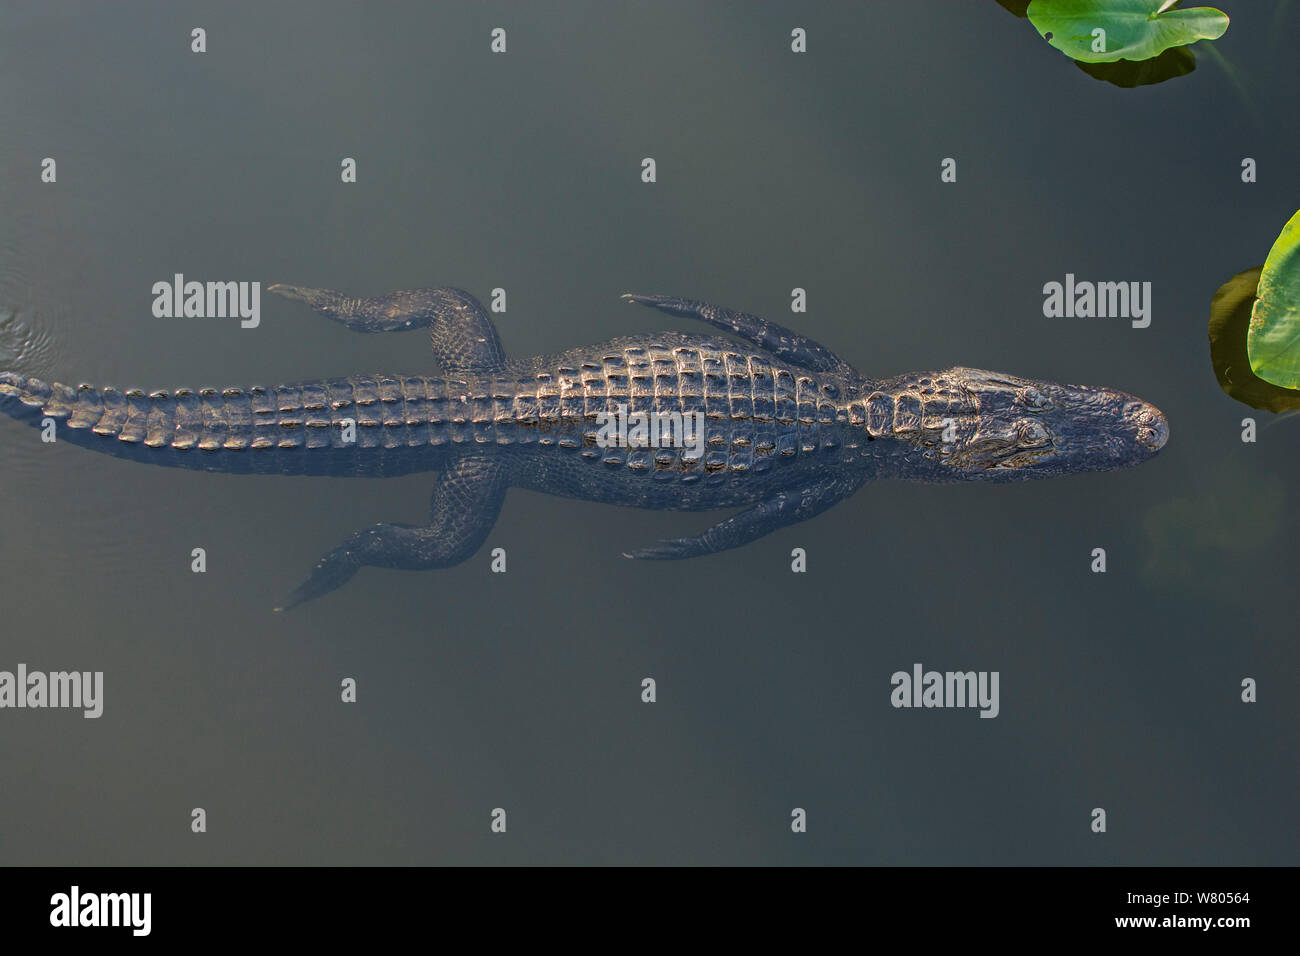 American alligator (Alligator mississippiensis) swimming, viewed from above, Everglades National Park, Florida, USA, March. Stock Photo